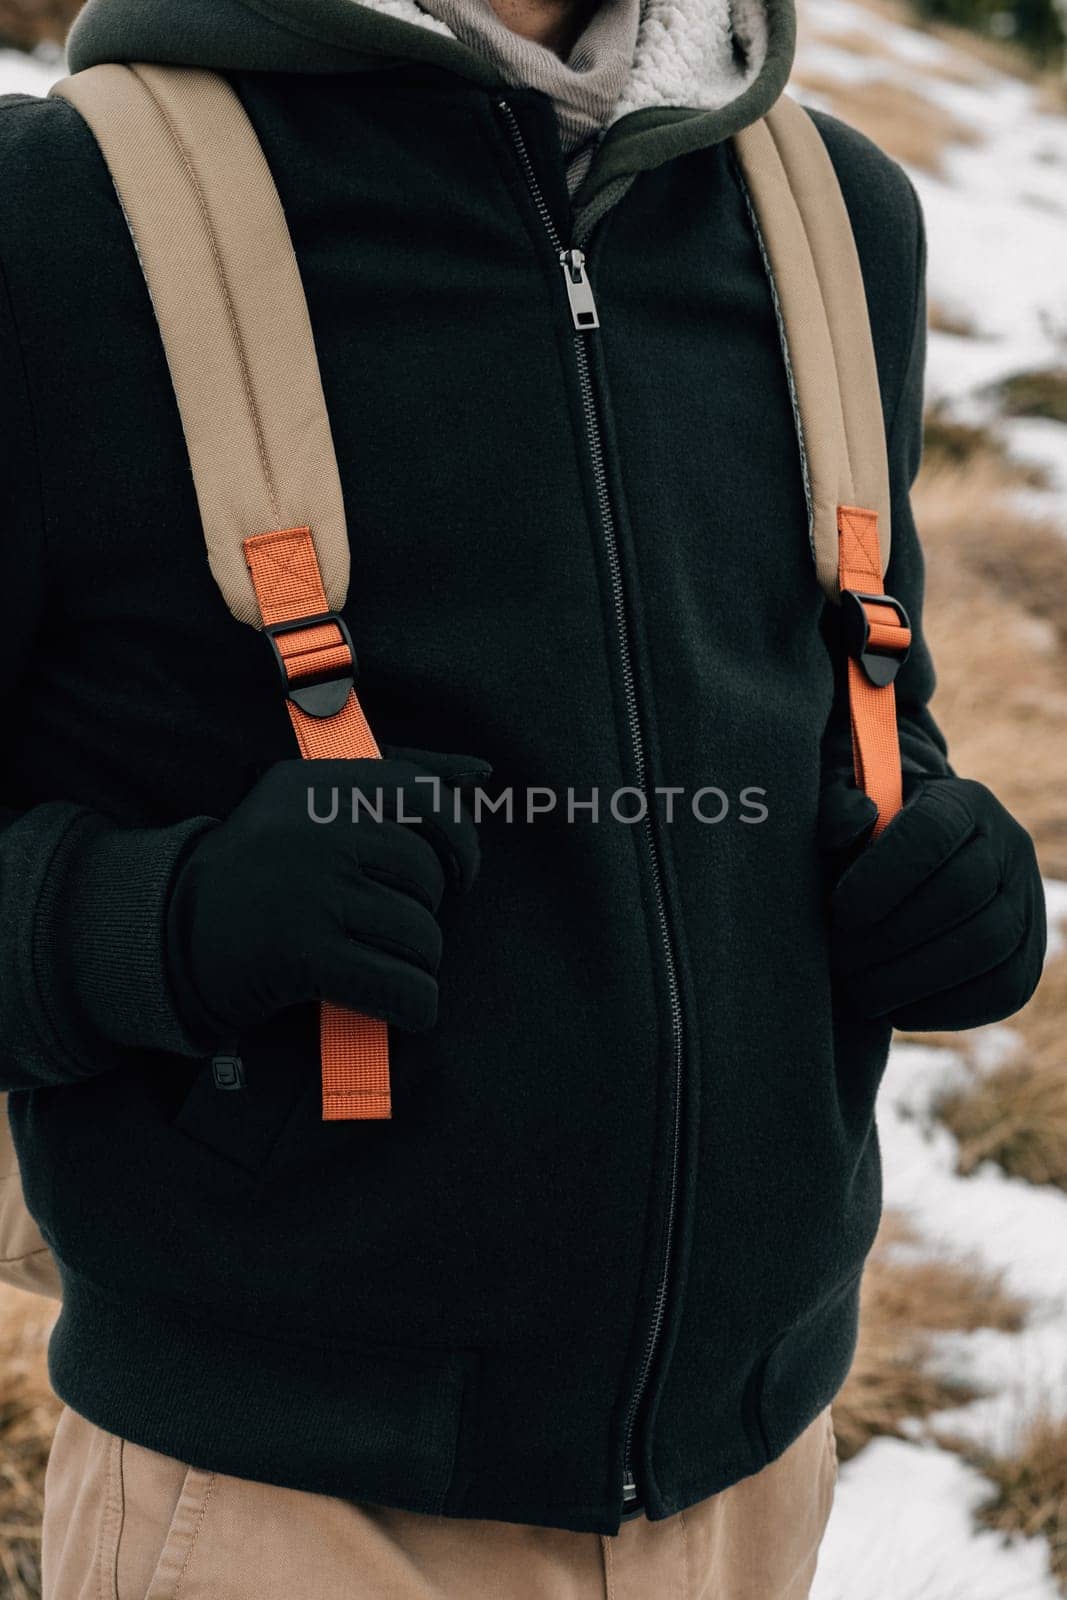 Winter outdoor clothing fashion with focus on black fleece jacket and tan backpack straps by apavlin